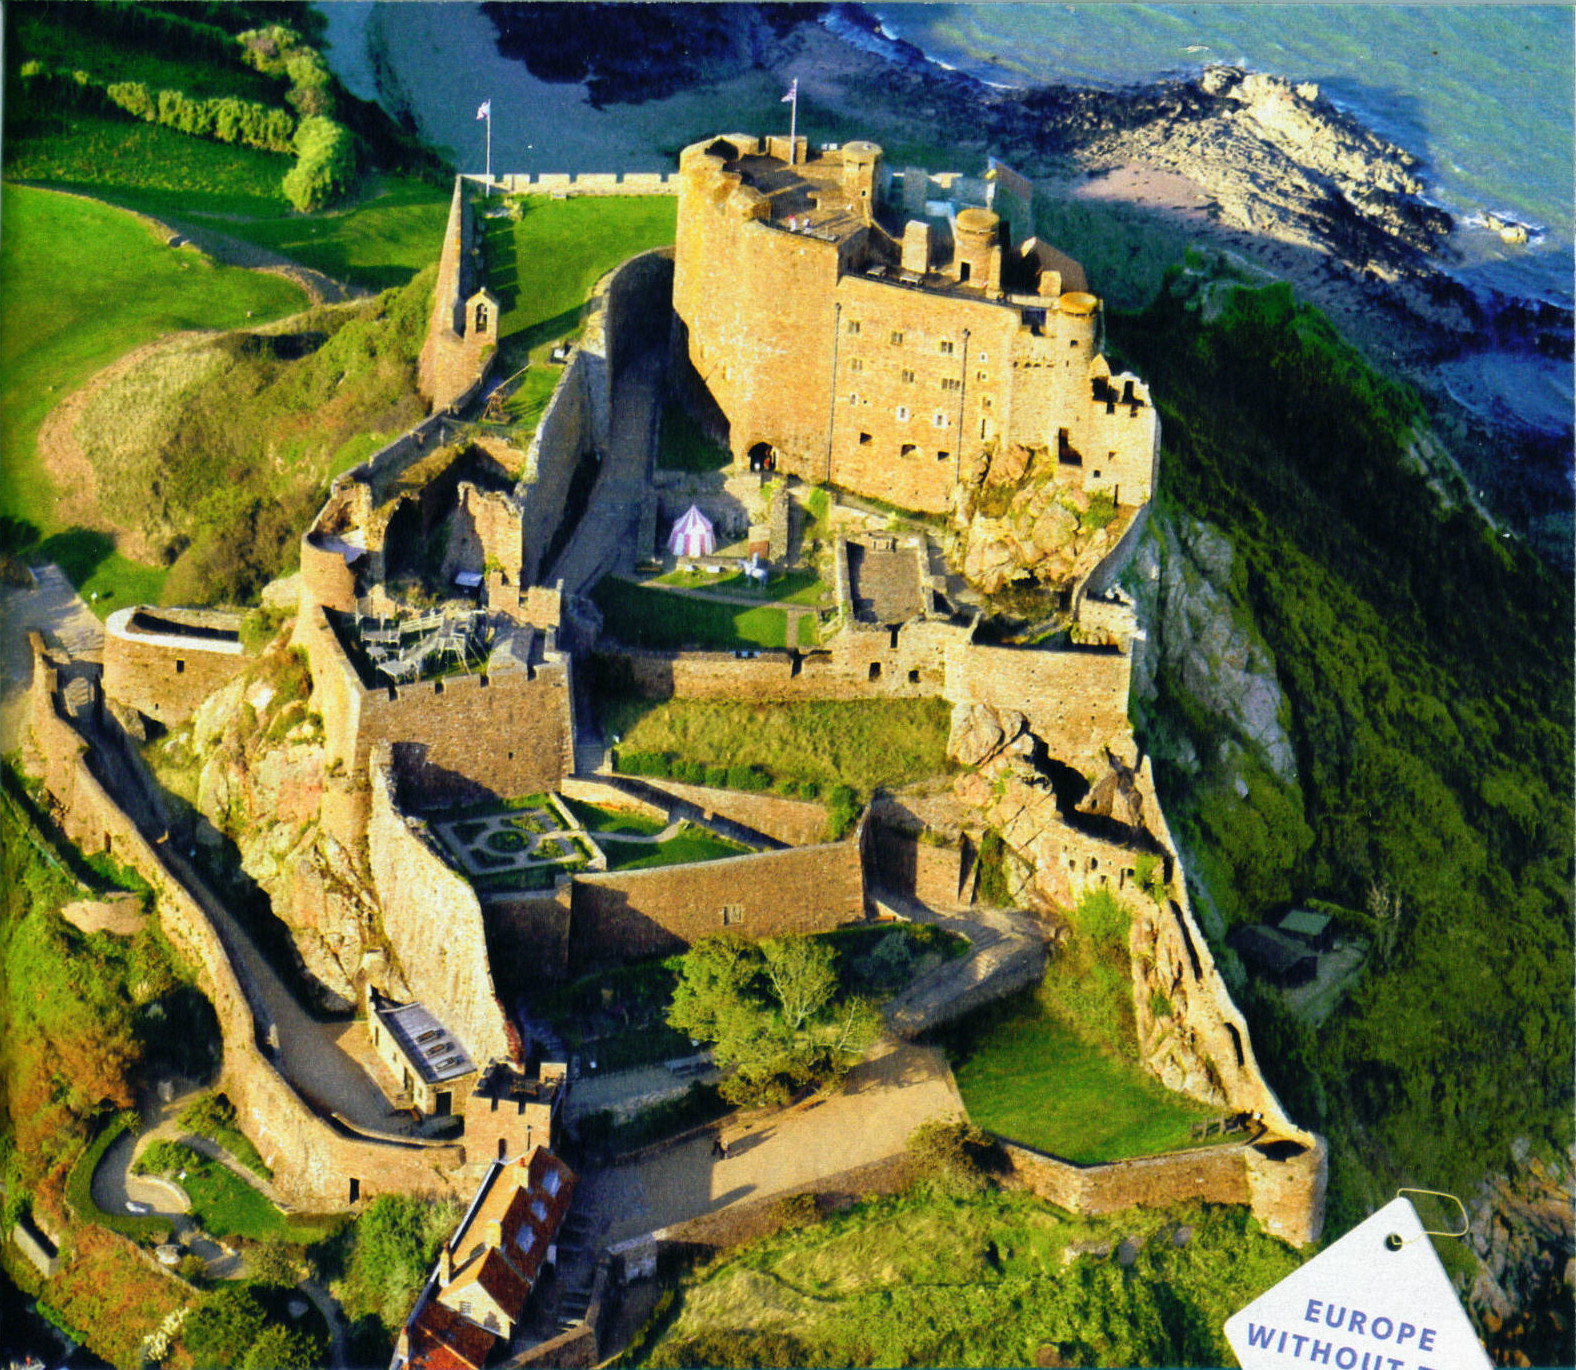 aerial view of vast, complex Mediaeval castle with lots of criss-crossing walls and courtyards